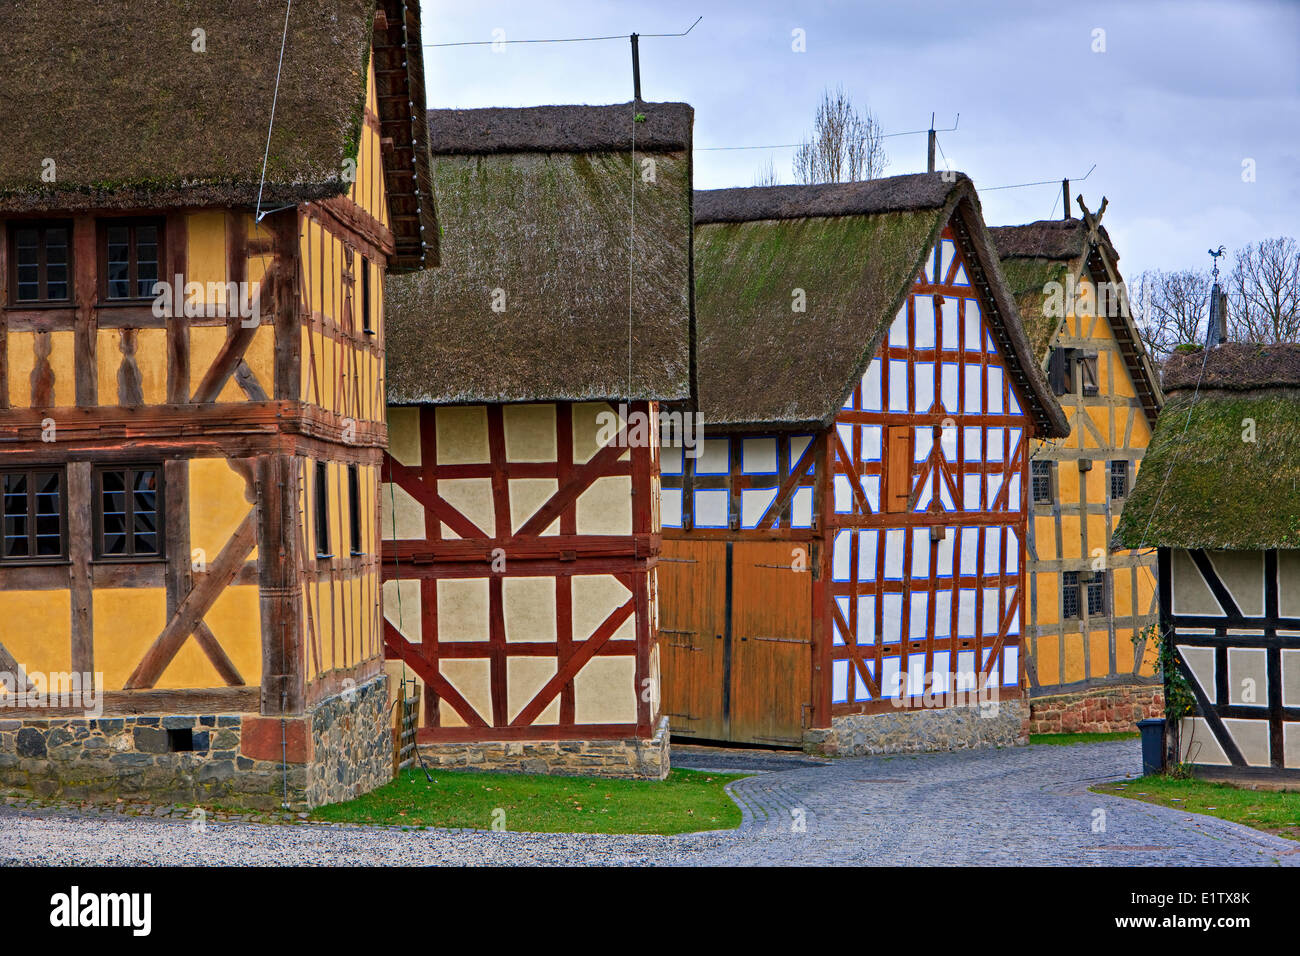 Half-timbered houses on display at Hessenpark (Open Air Museum), Neu-Anspach, Hessen, Germany, Europe. Stock Photo